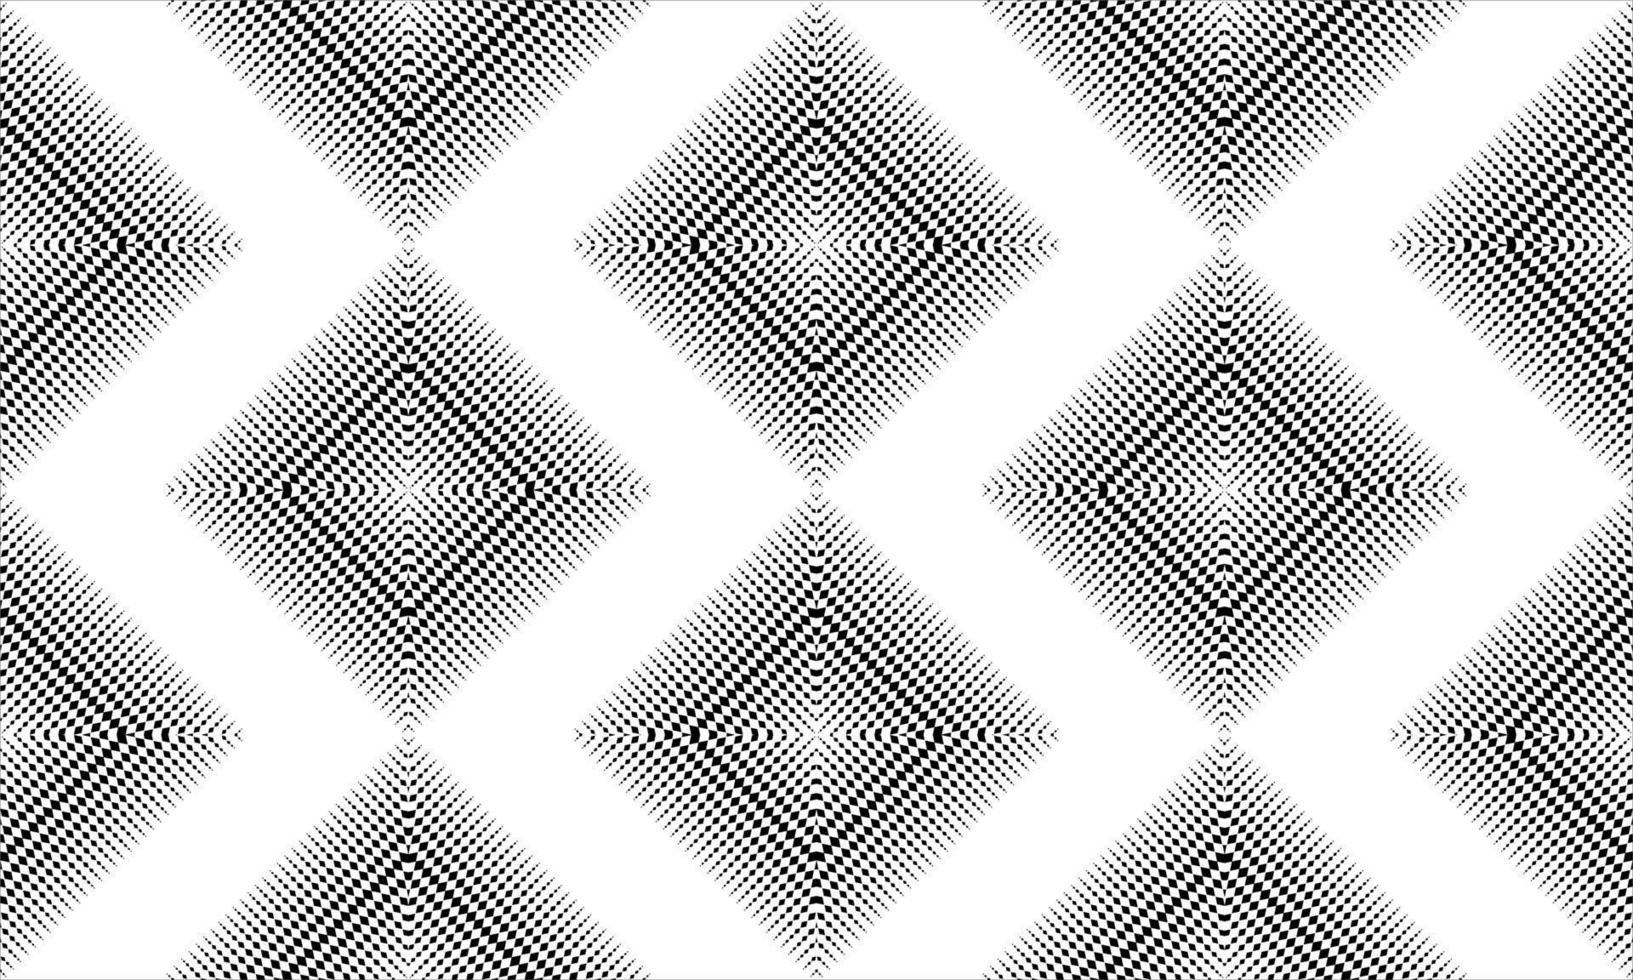 Optical Illusion made from Rectangles Composition. Vector Illustration. Contemporary Decoration for Interior, Exterior, Carpet, Textile, Garment, Cloth, Silk, Tile, Plastic, Paper, Wrapping, Wallpaper